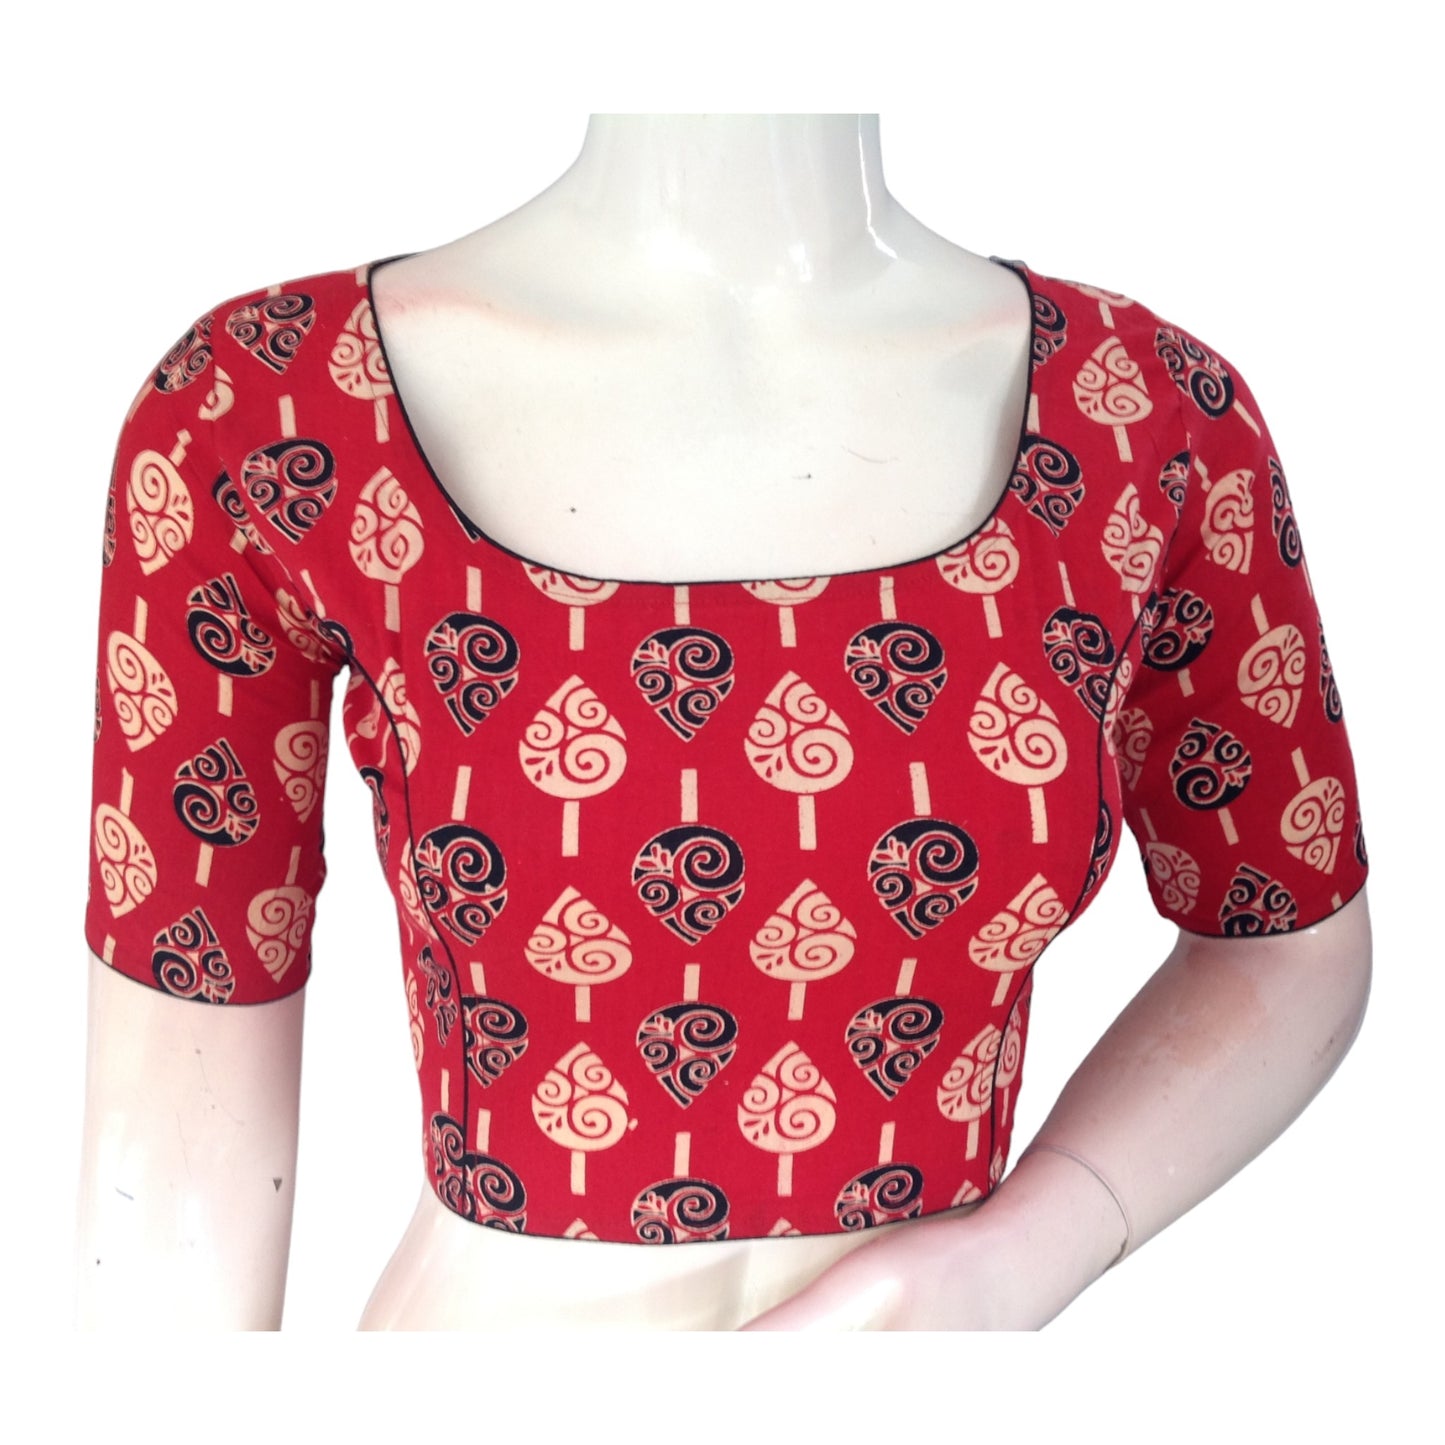 Radiant Red High Neck Saree Blouse | Ready made | Premium Cotton | Made in India